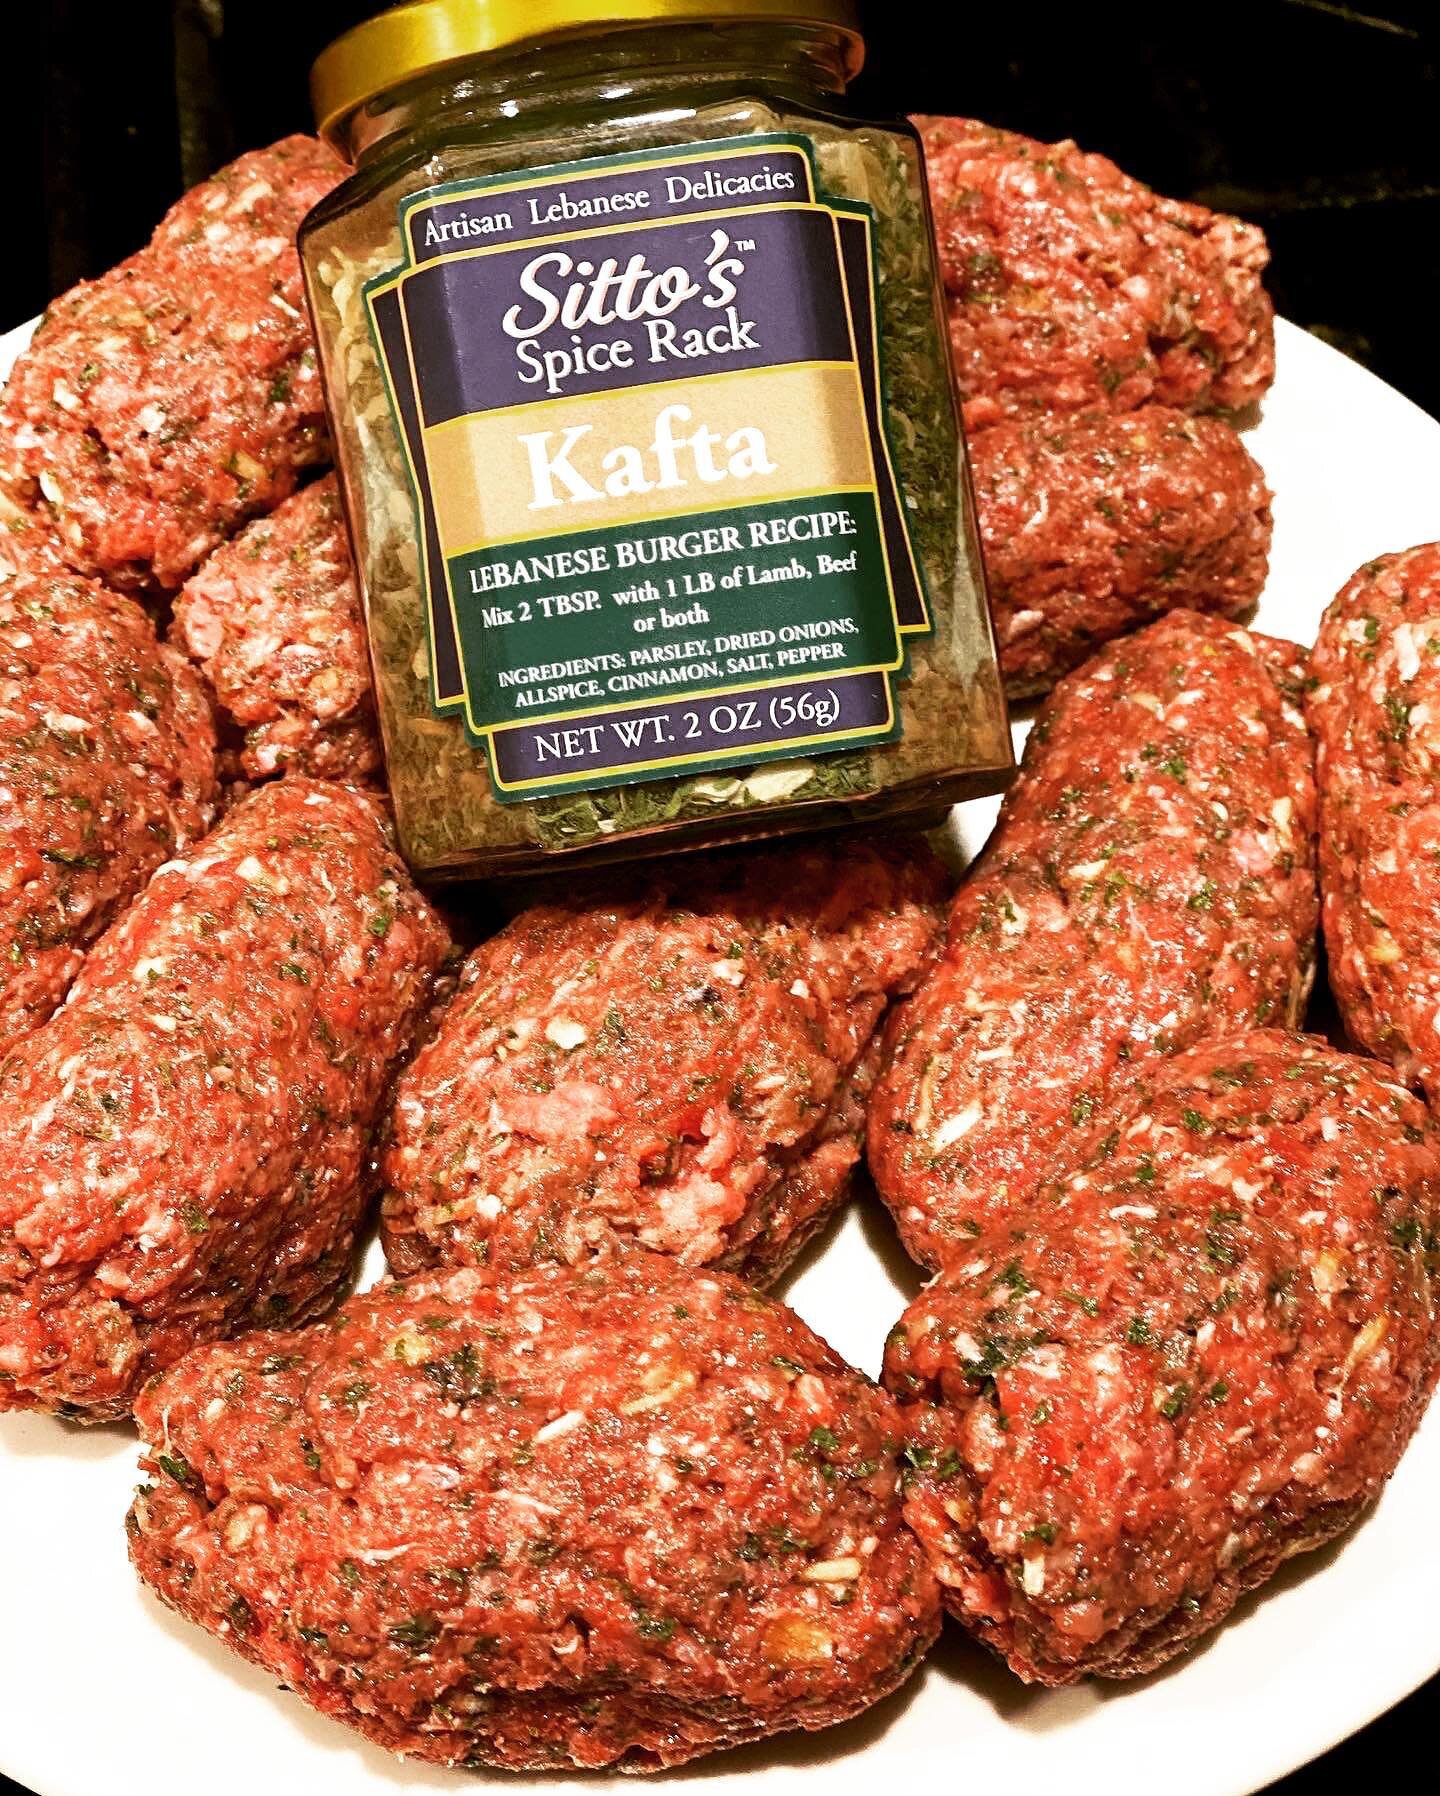 Kafta blend from Sitto&rsquo;s Spice Rack has all of the herbs &amp; spices you need (including the salt &amp; pepper) to make delicious kafta at home in minutes.  Recipe is on the label!  No need to have lots of different spices you normally won&rsq